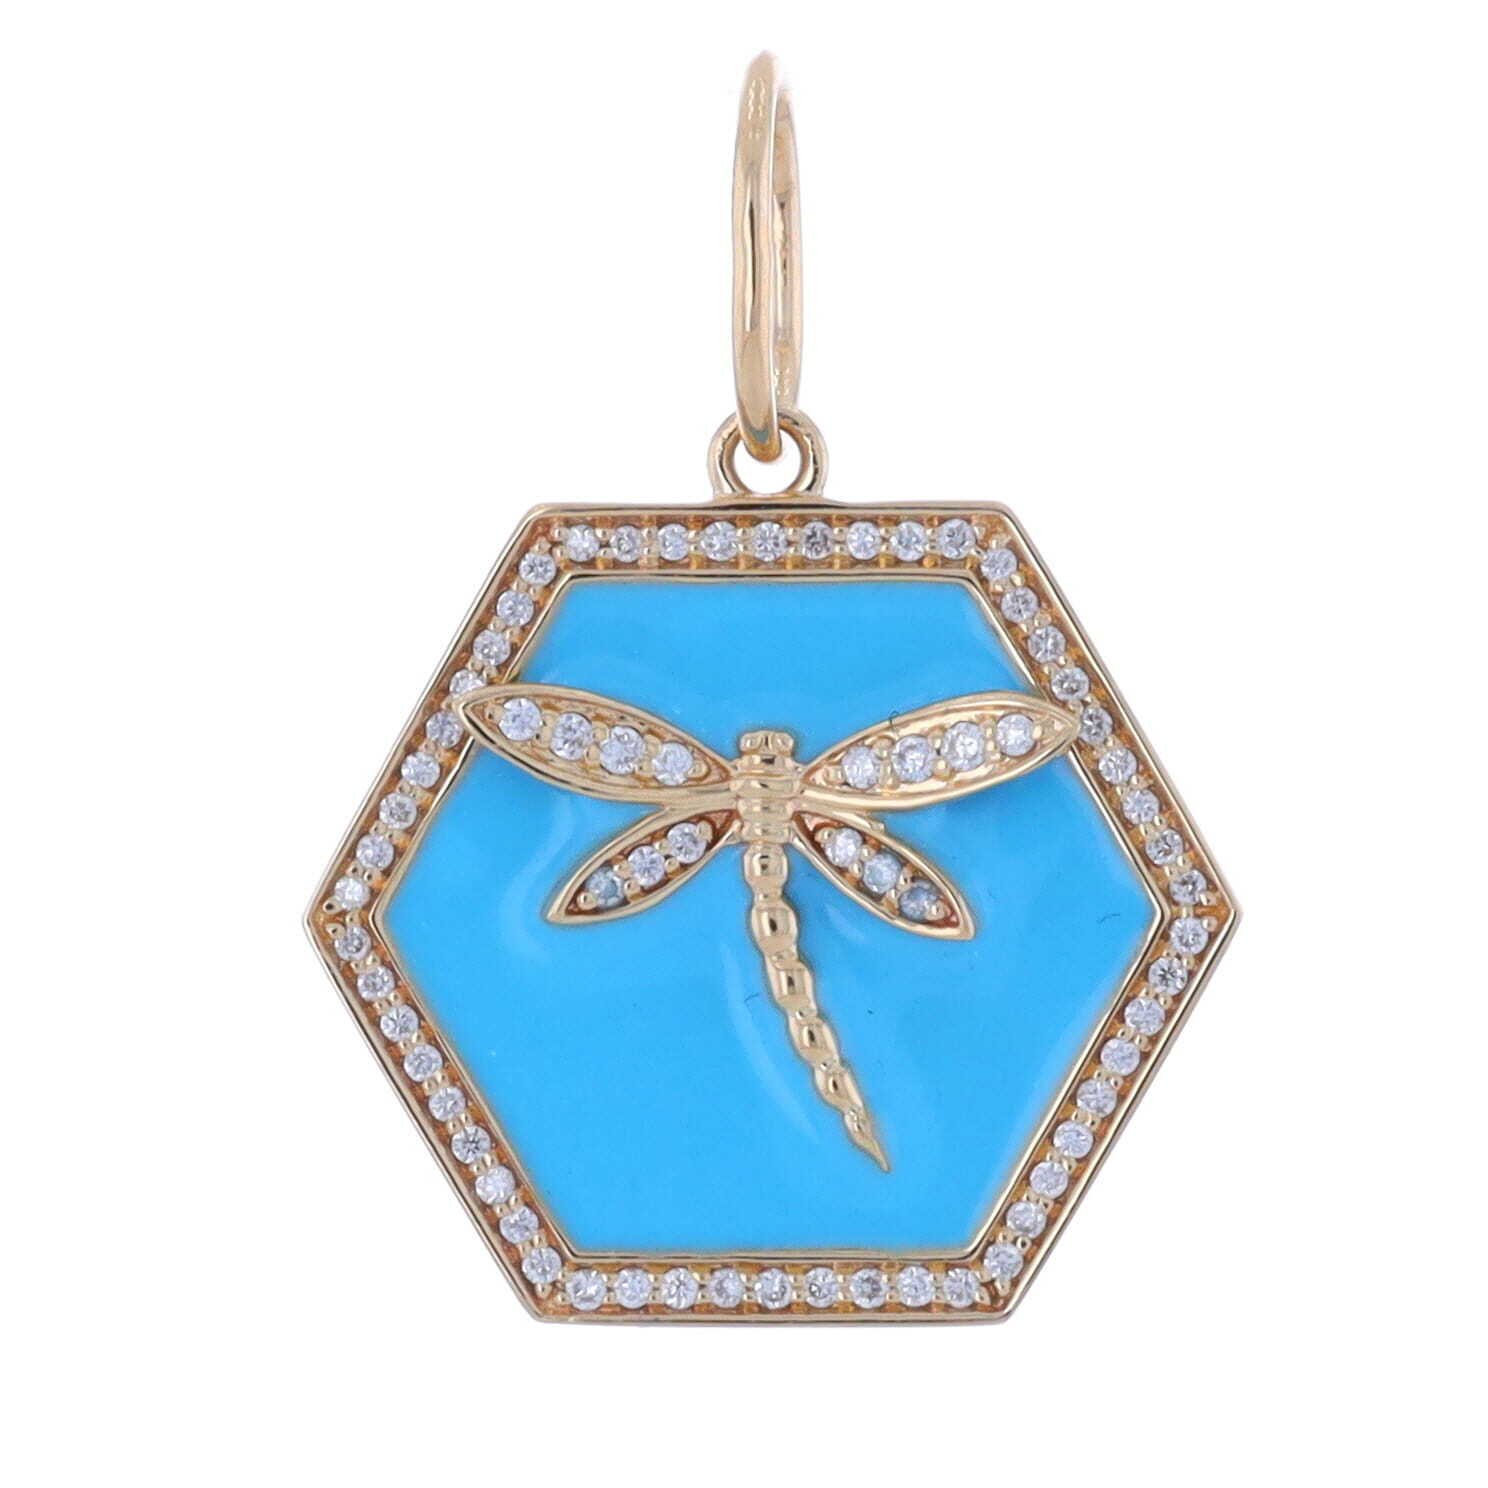 14K Yellow Gold with Turquoise Enamel Hexagon Pendant Charm with Pave Diamond Dragonfly Decal Pendant